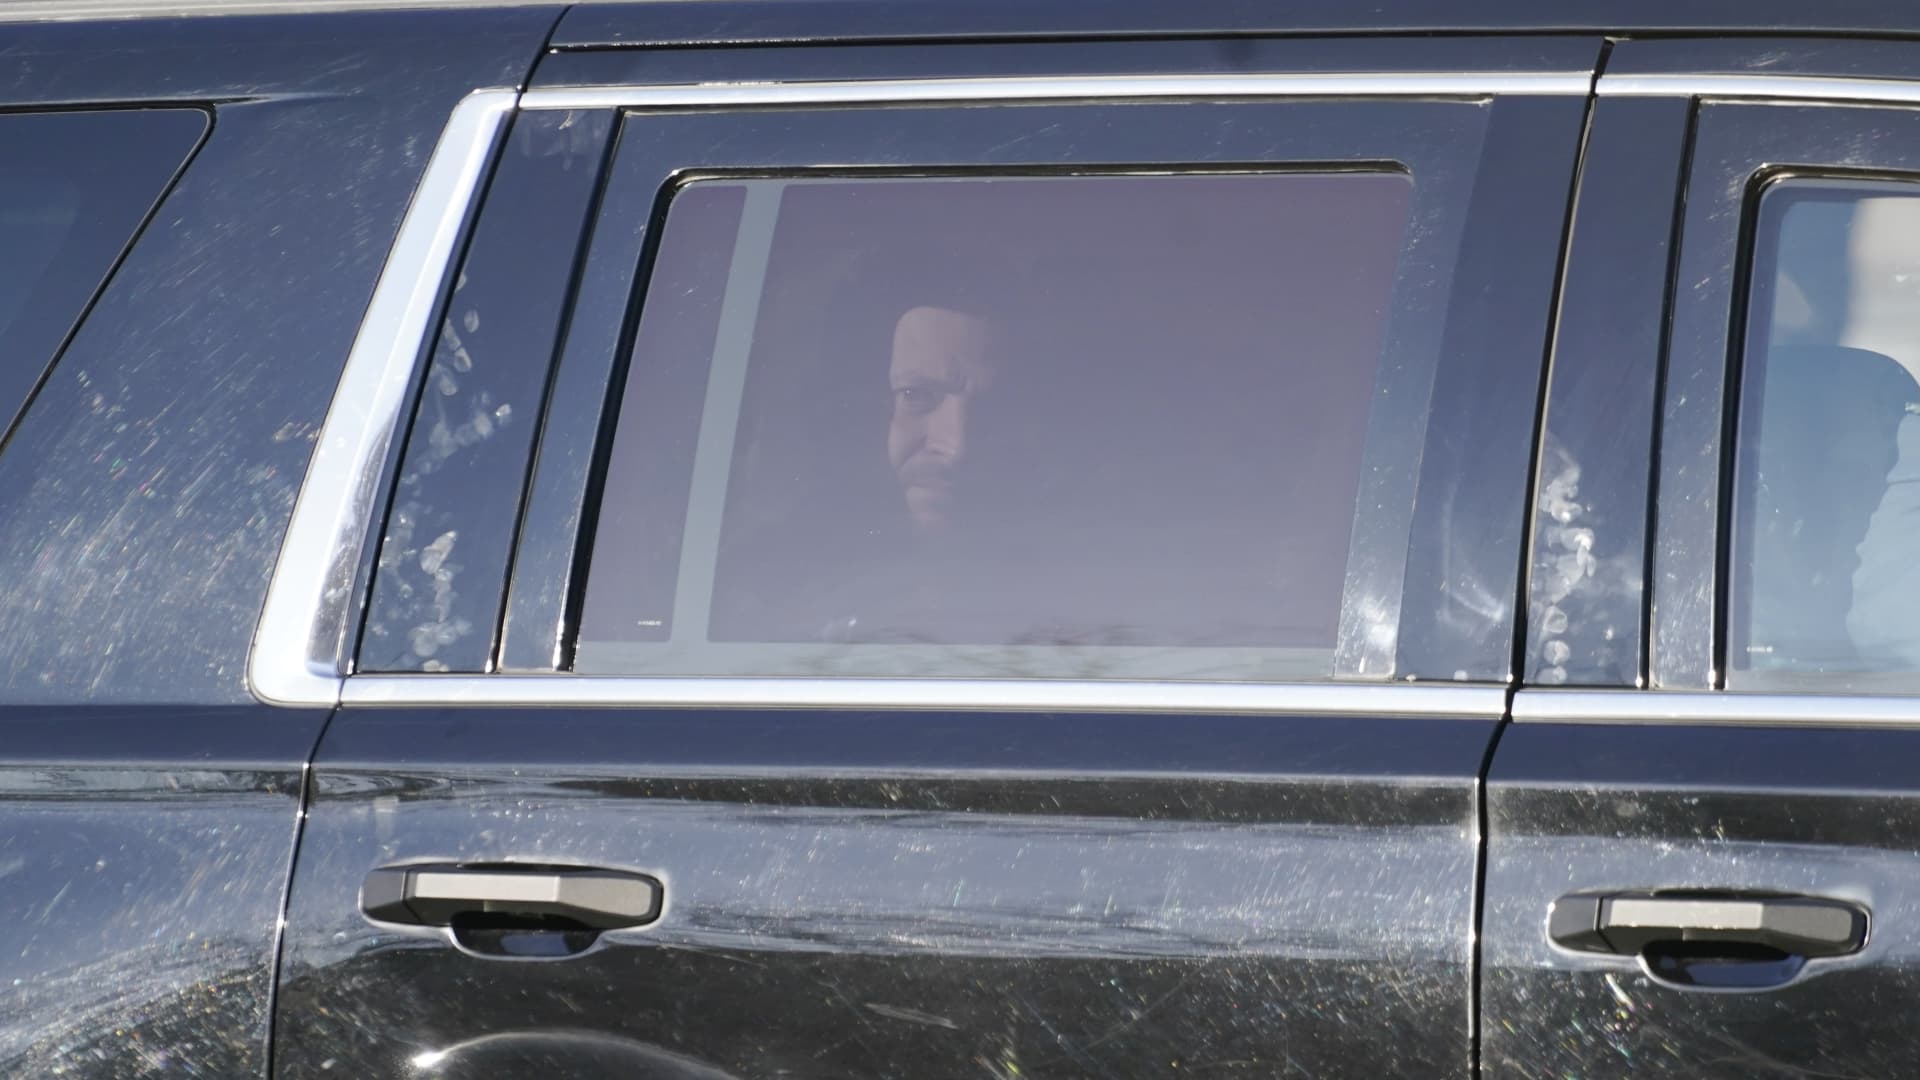 Ukrainian President Volodymyr Zelenskyy looks out as he is driven to the White House in Washington, Wednesday, Dec. 21, 2022.